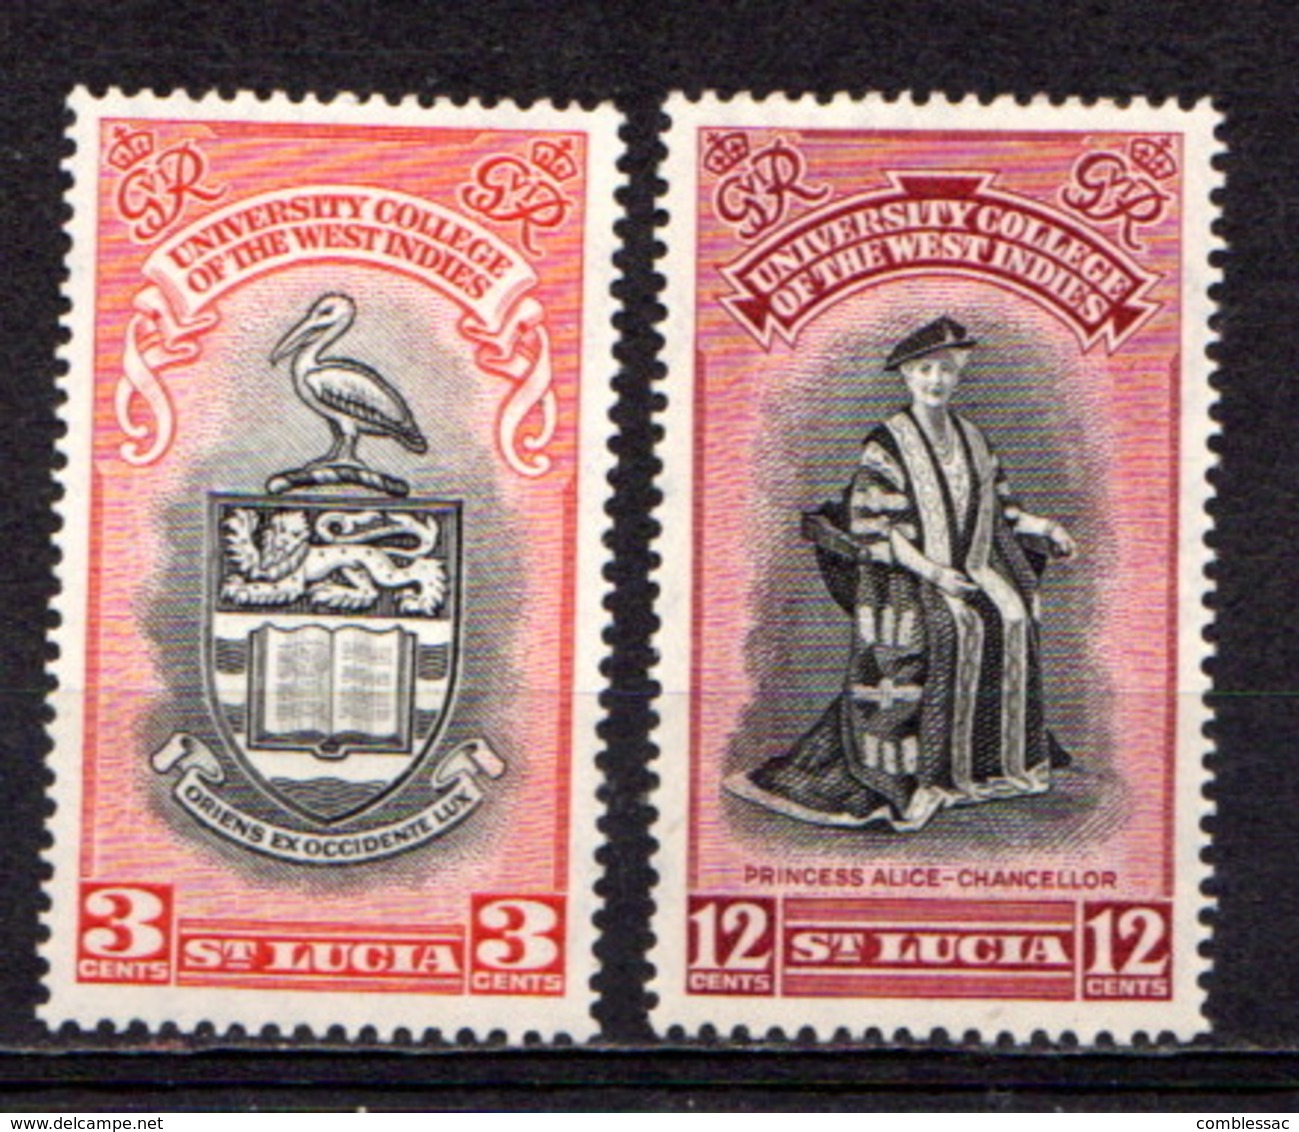 SAINT LUCIA    1951    Inauguration  Of  B W I University  College    Set  Of  2    MH - Ste Lucie (...-1978)